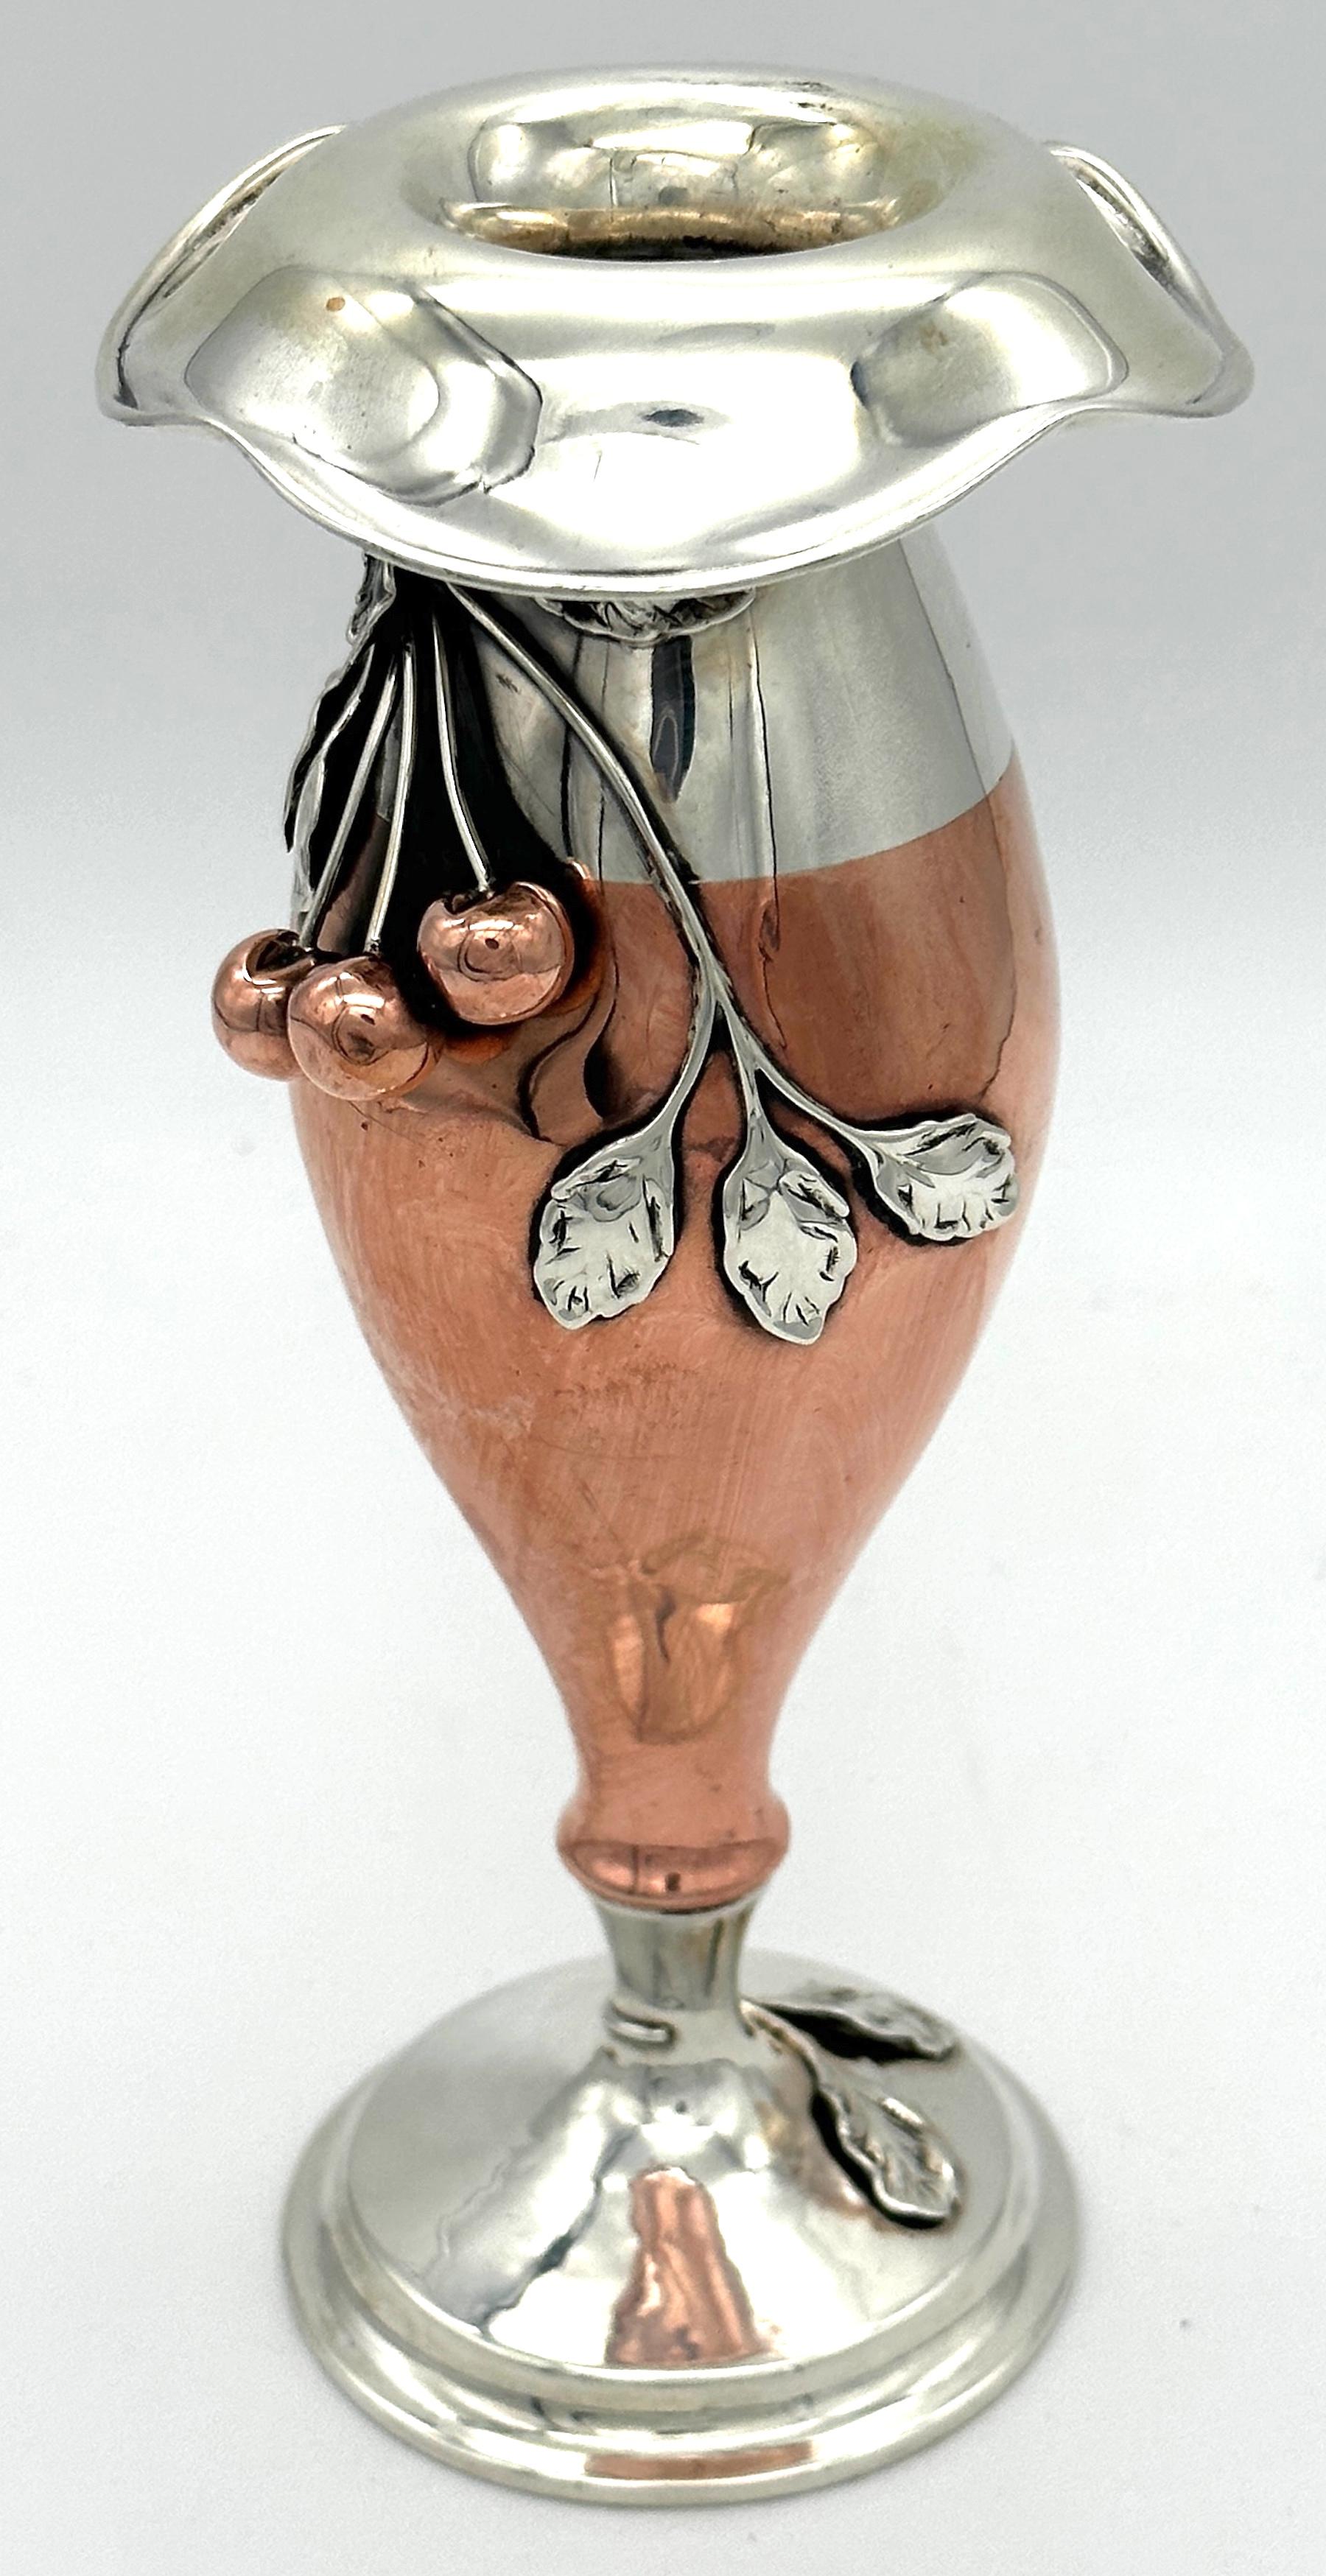 American Art Nouveau Mixed Metal Copper & Sterling Cherry Motif Vase
Unmarked, Attributed to  La Pierre, Newark, N.J., C.1900

Indulge in the  exquisite beauty of American Art Nouveau with this stunning Mixed Metal Copper & Sterling Cherry Motif